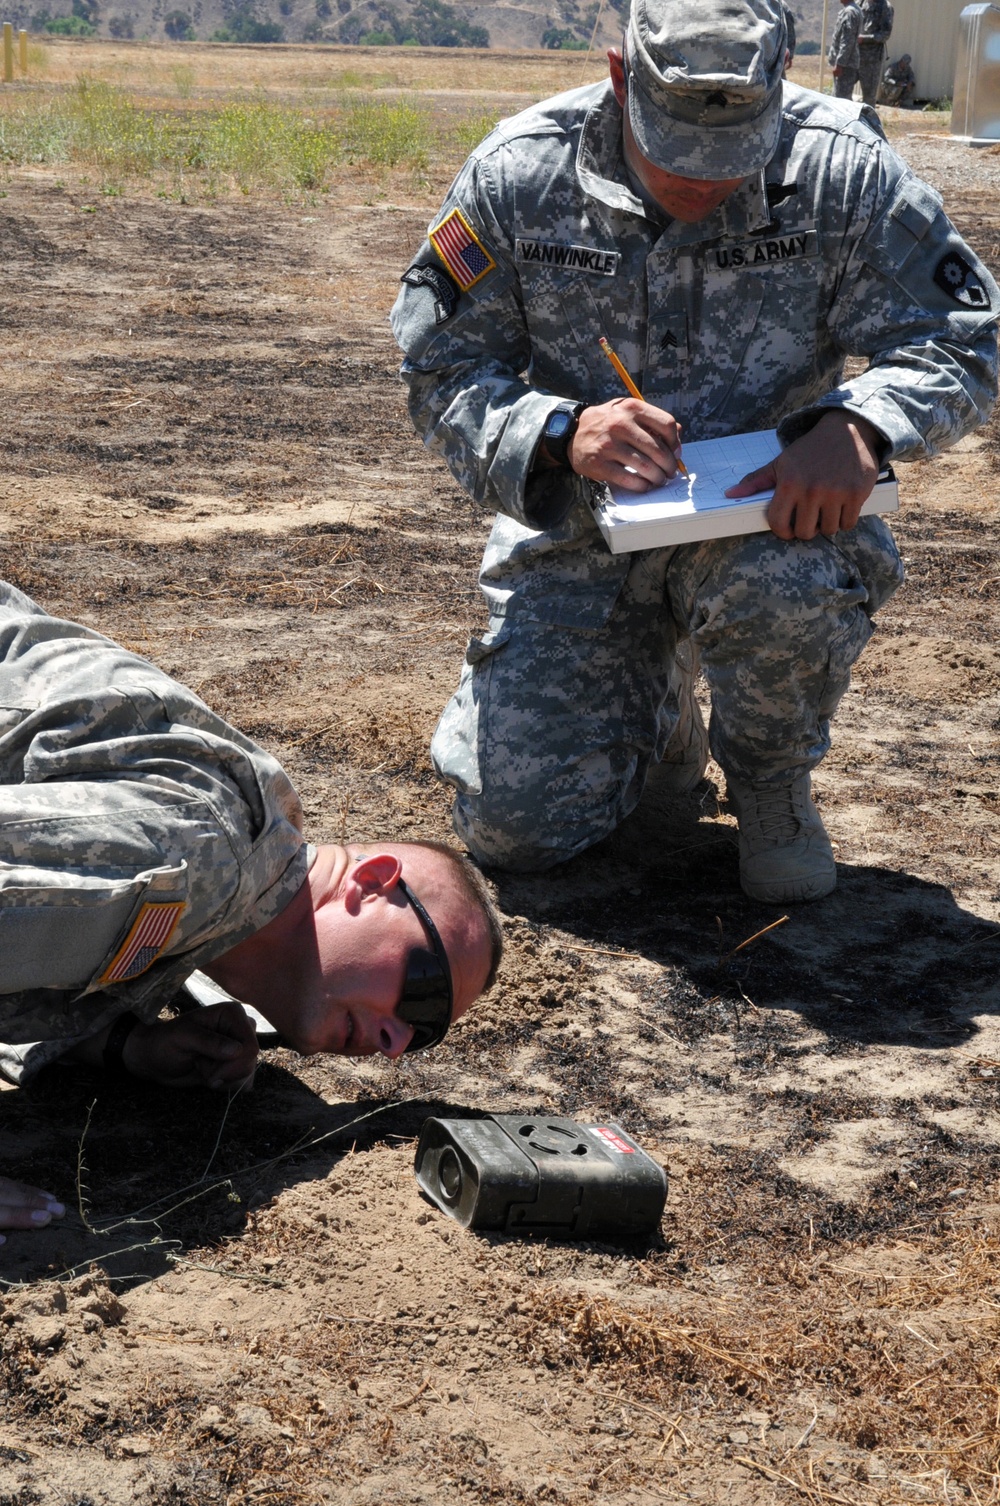 217th EOD, law enforcement team up for training